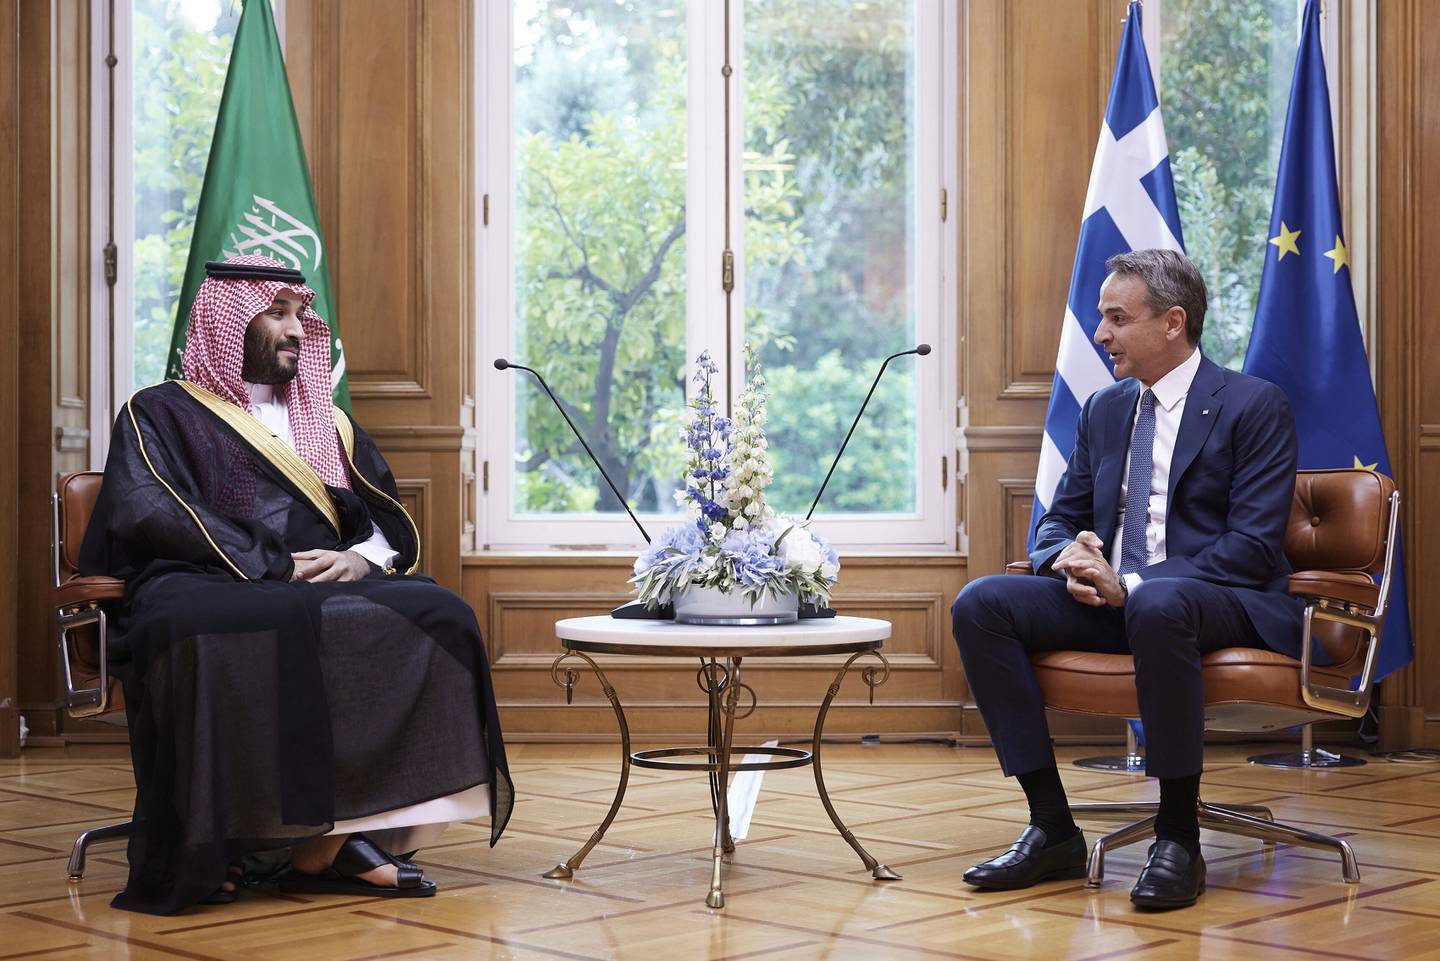 Greek Prime Minister Kyriakos Mitsotakis speaks to Saudi Arabia's Crown Prince Mohammed bin Salman during a meeting in Athens. Prince Mohammed has now travelled to France. AP